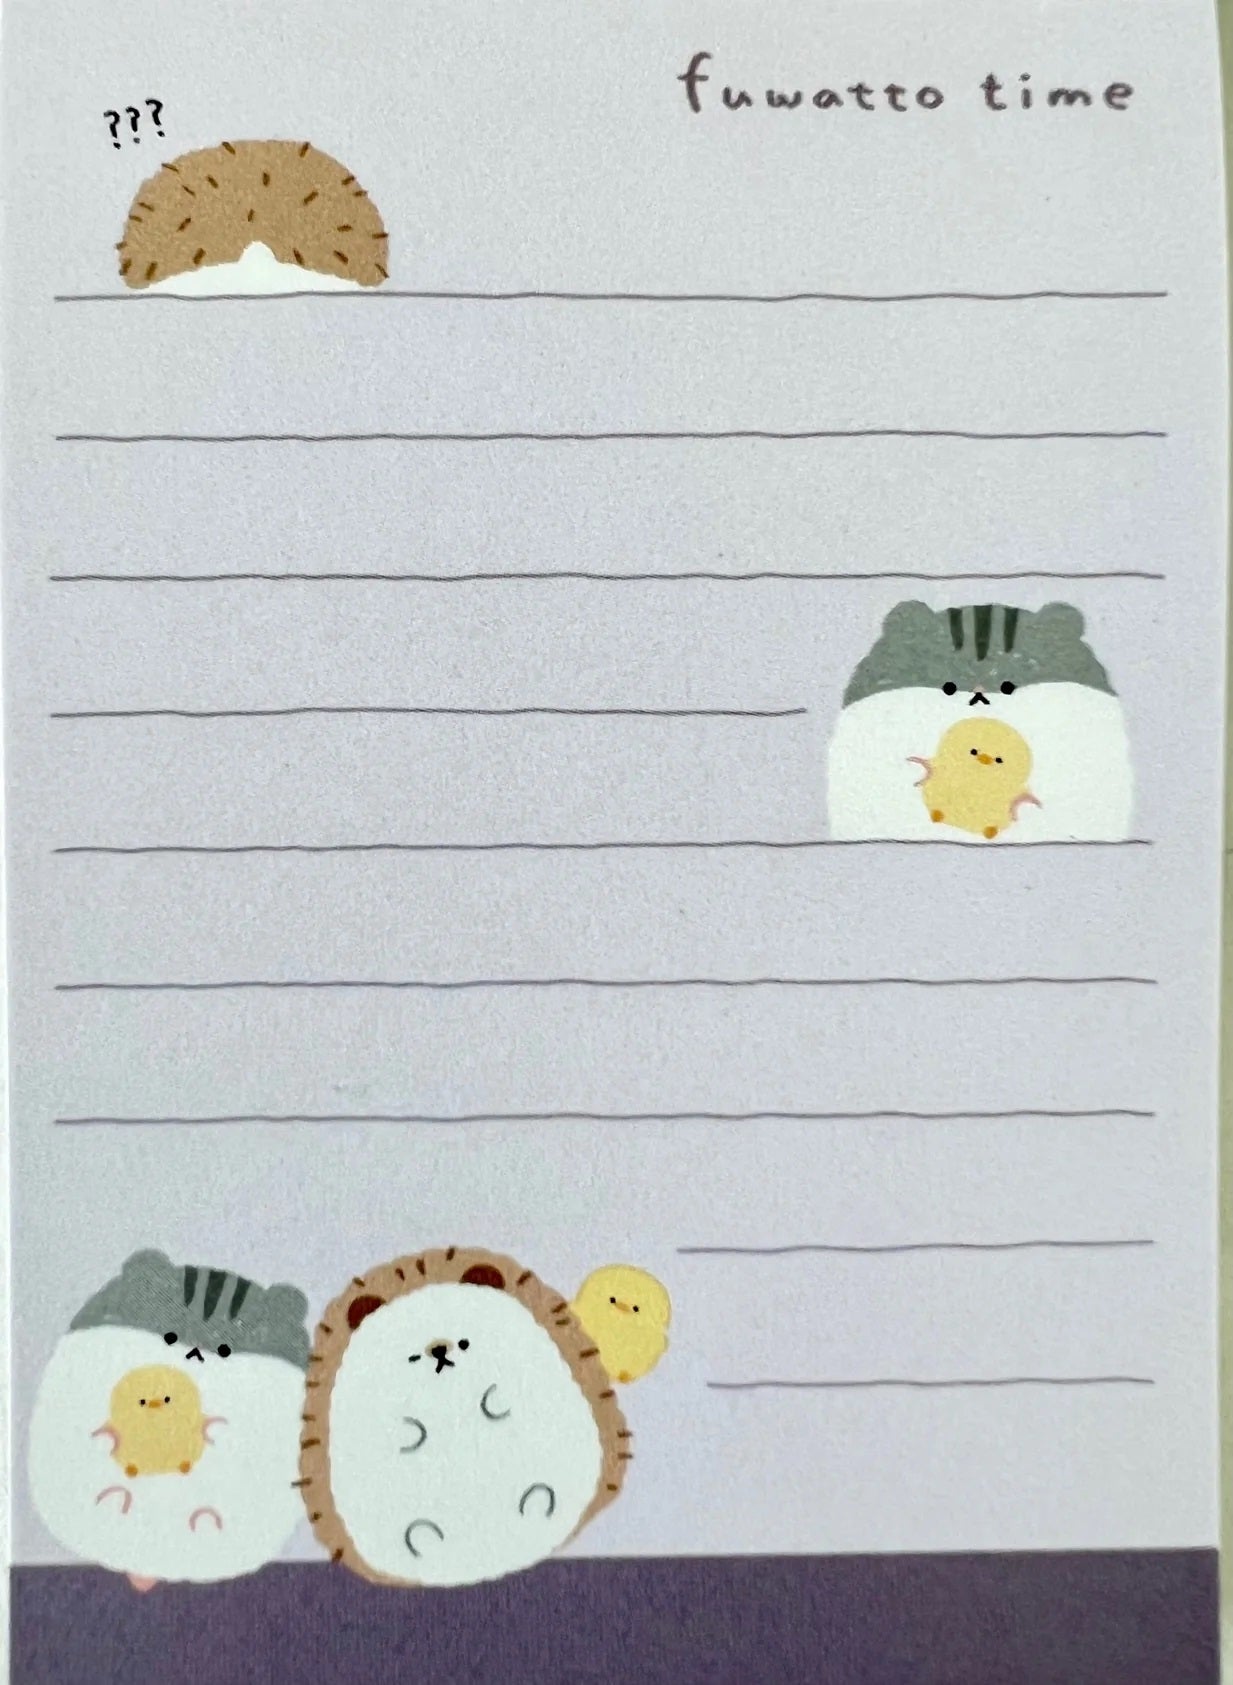 Hamster And Hedgehog Mini Note Pad Fuwatto Time